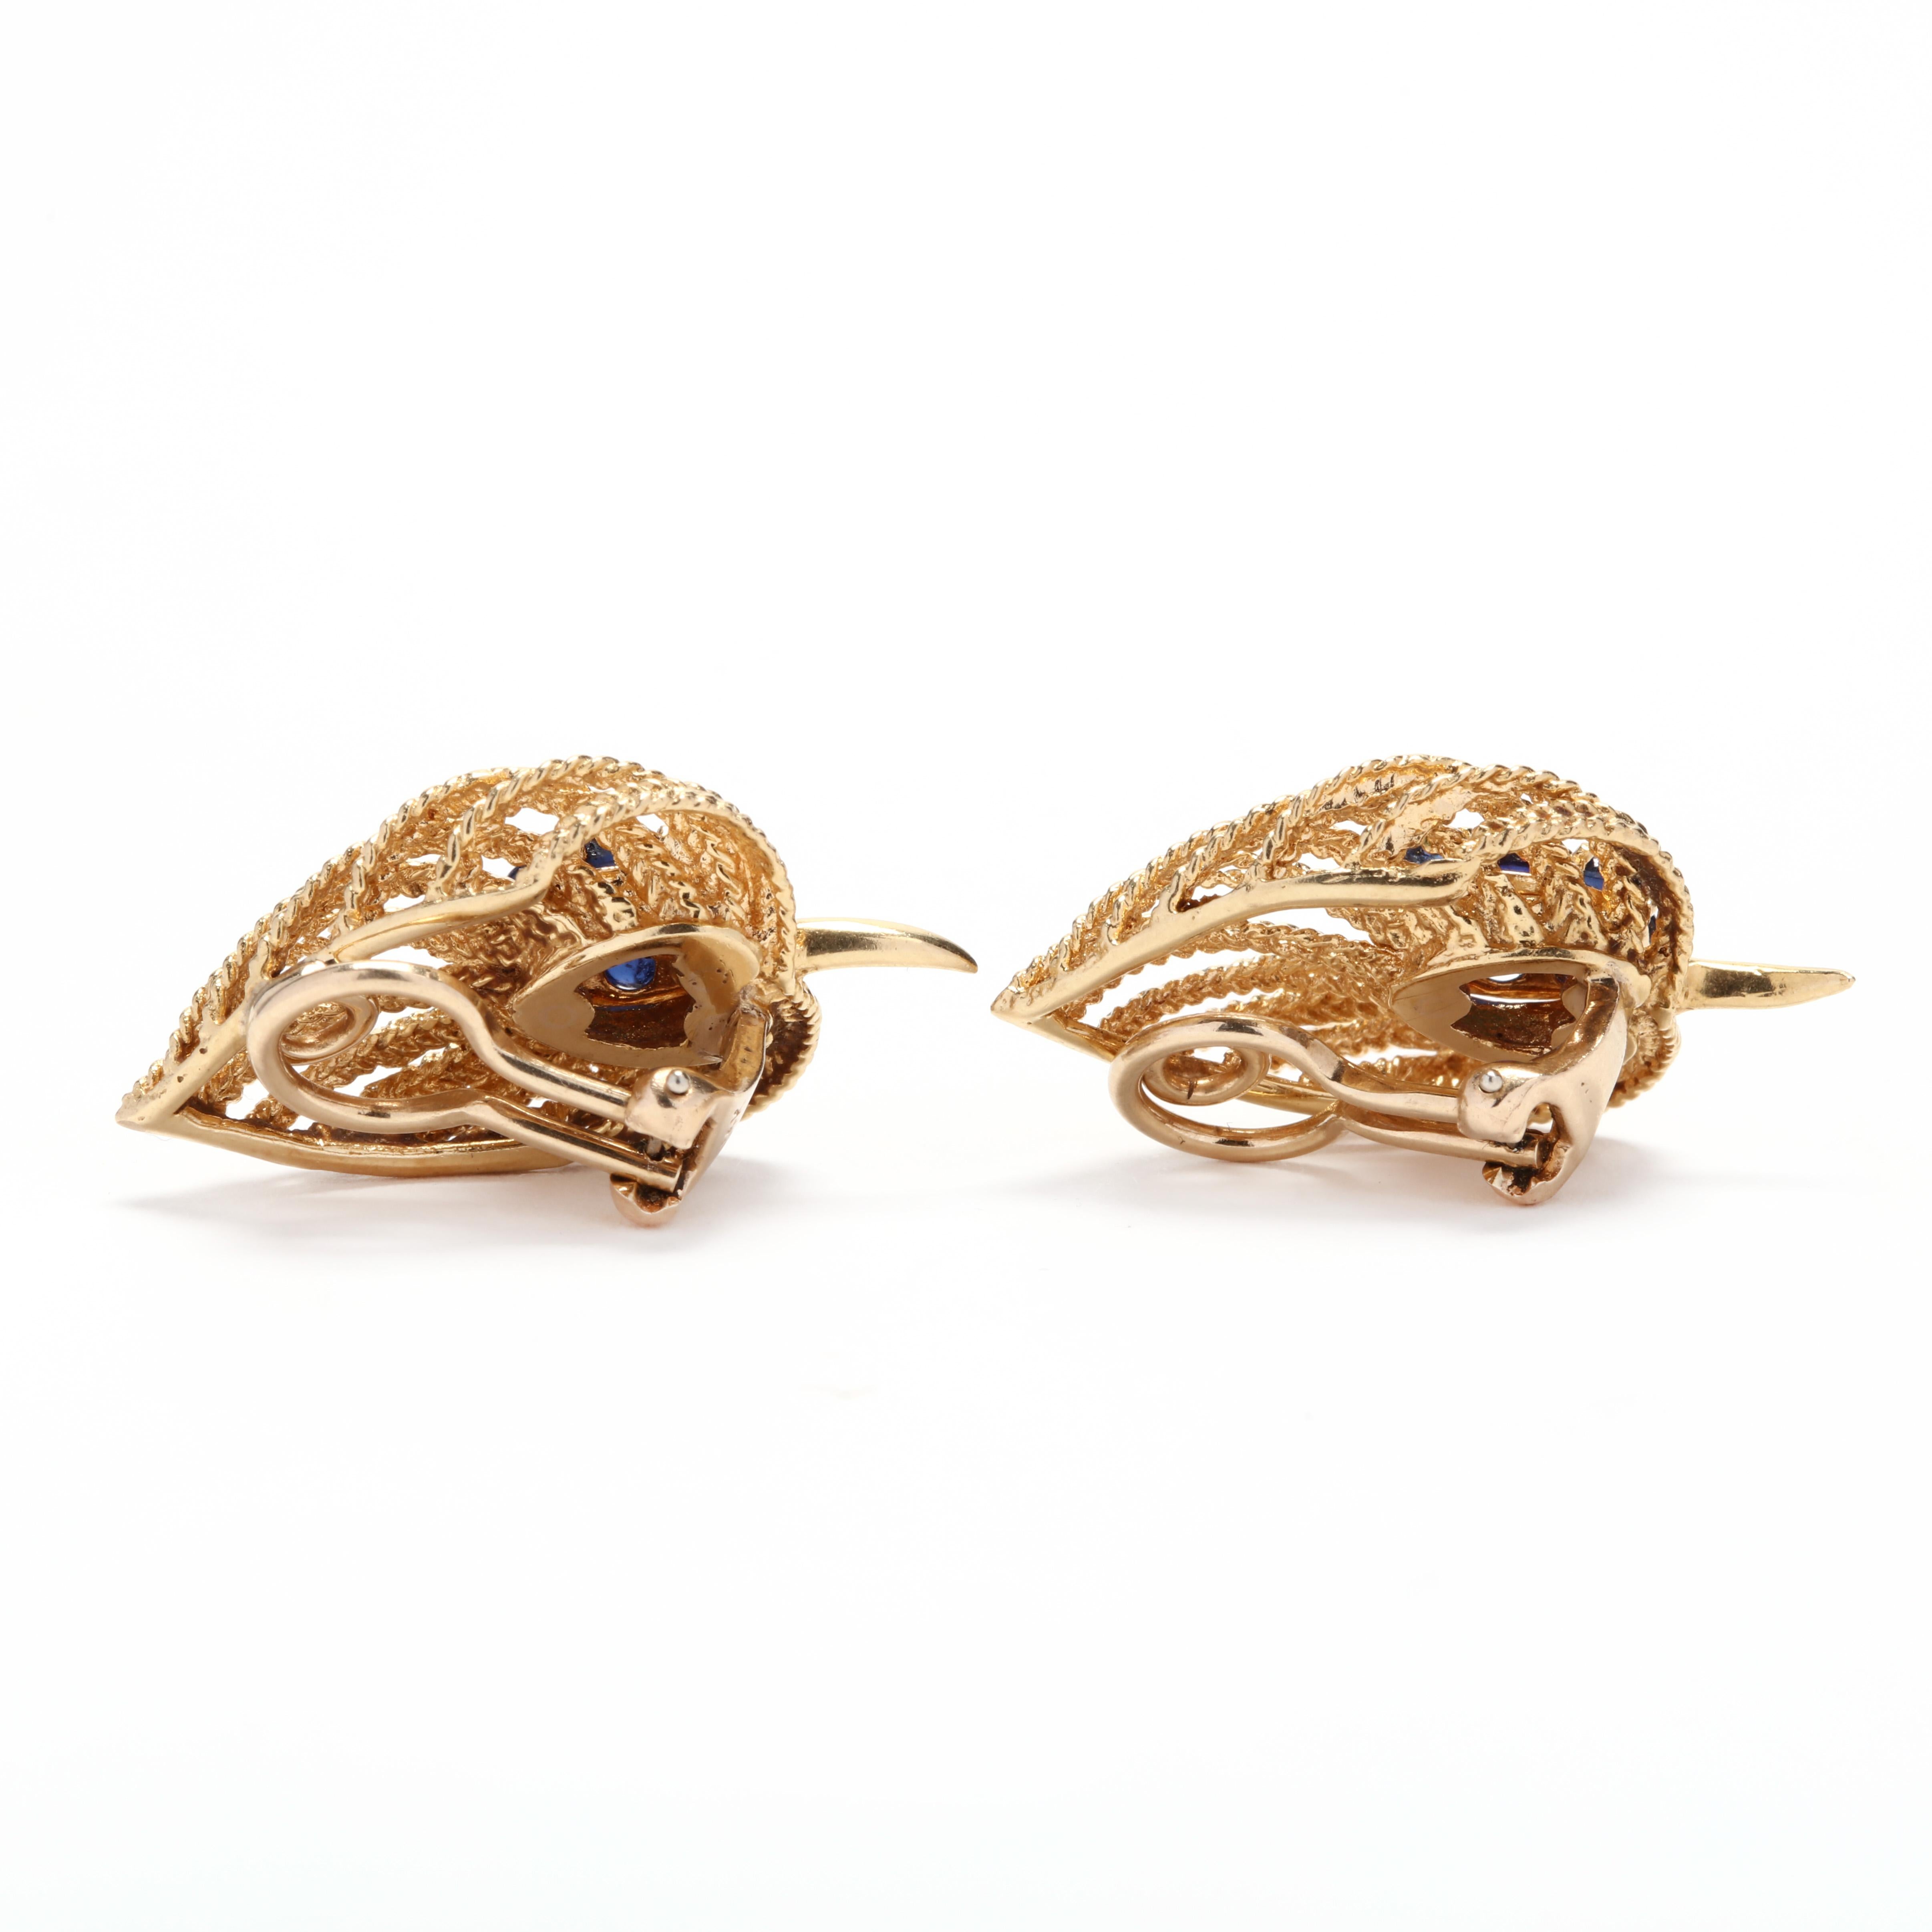 A pair of vintage 18 karat yellow gold, turquoise and sapphire leaf clip on earrings. These earrings feature an open work, braid motif leaf design each with two round, cabochon turquoise stones surrounded by round, cabochon sapphire stones and with